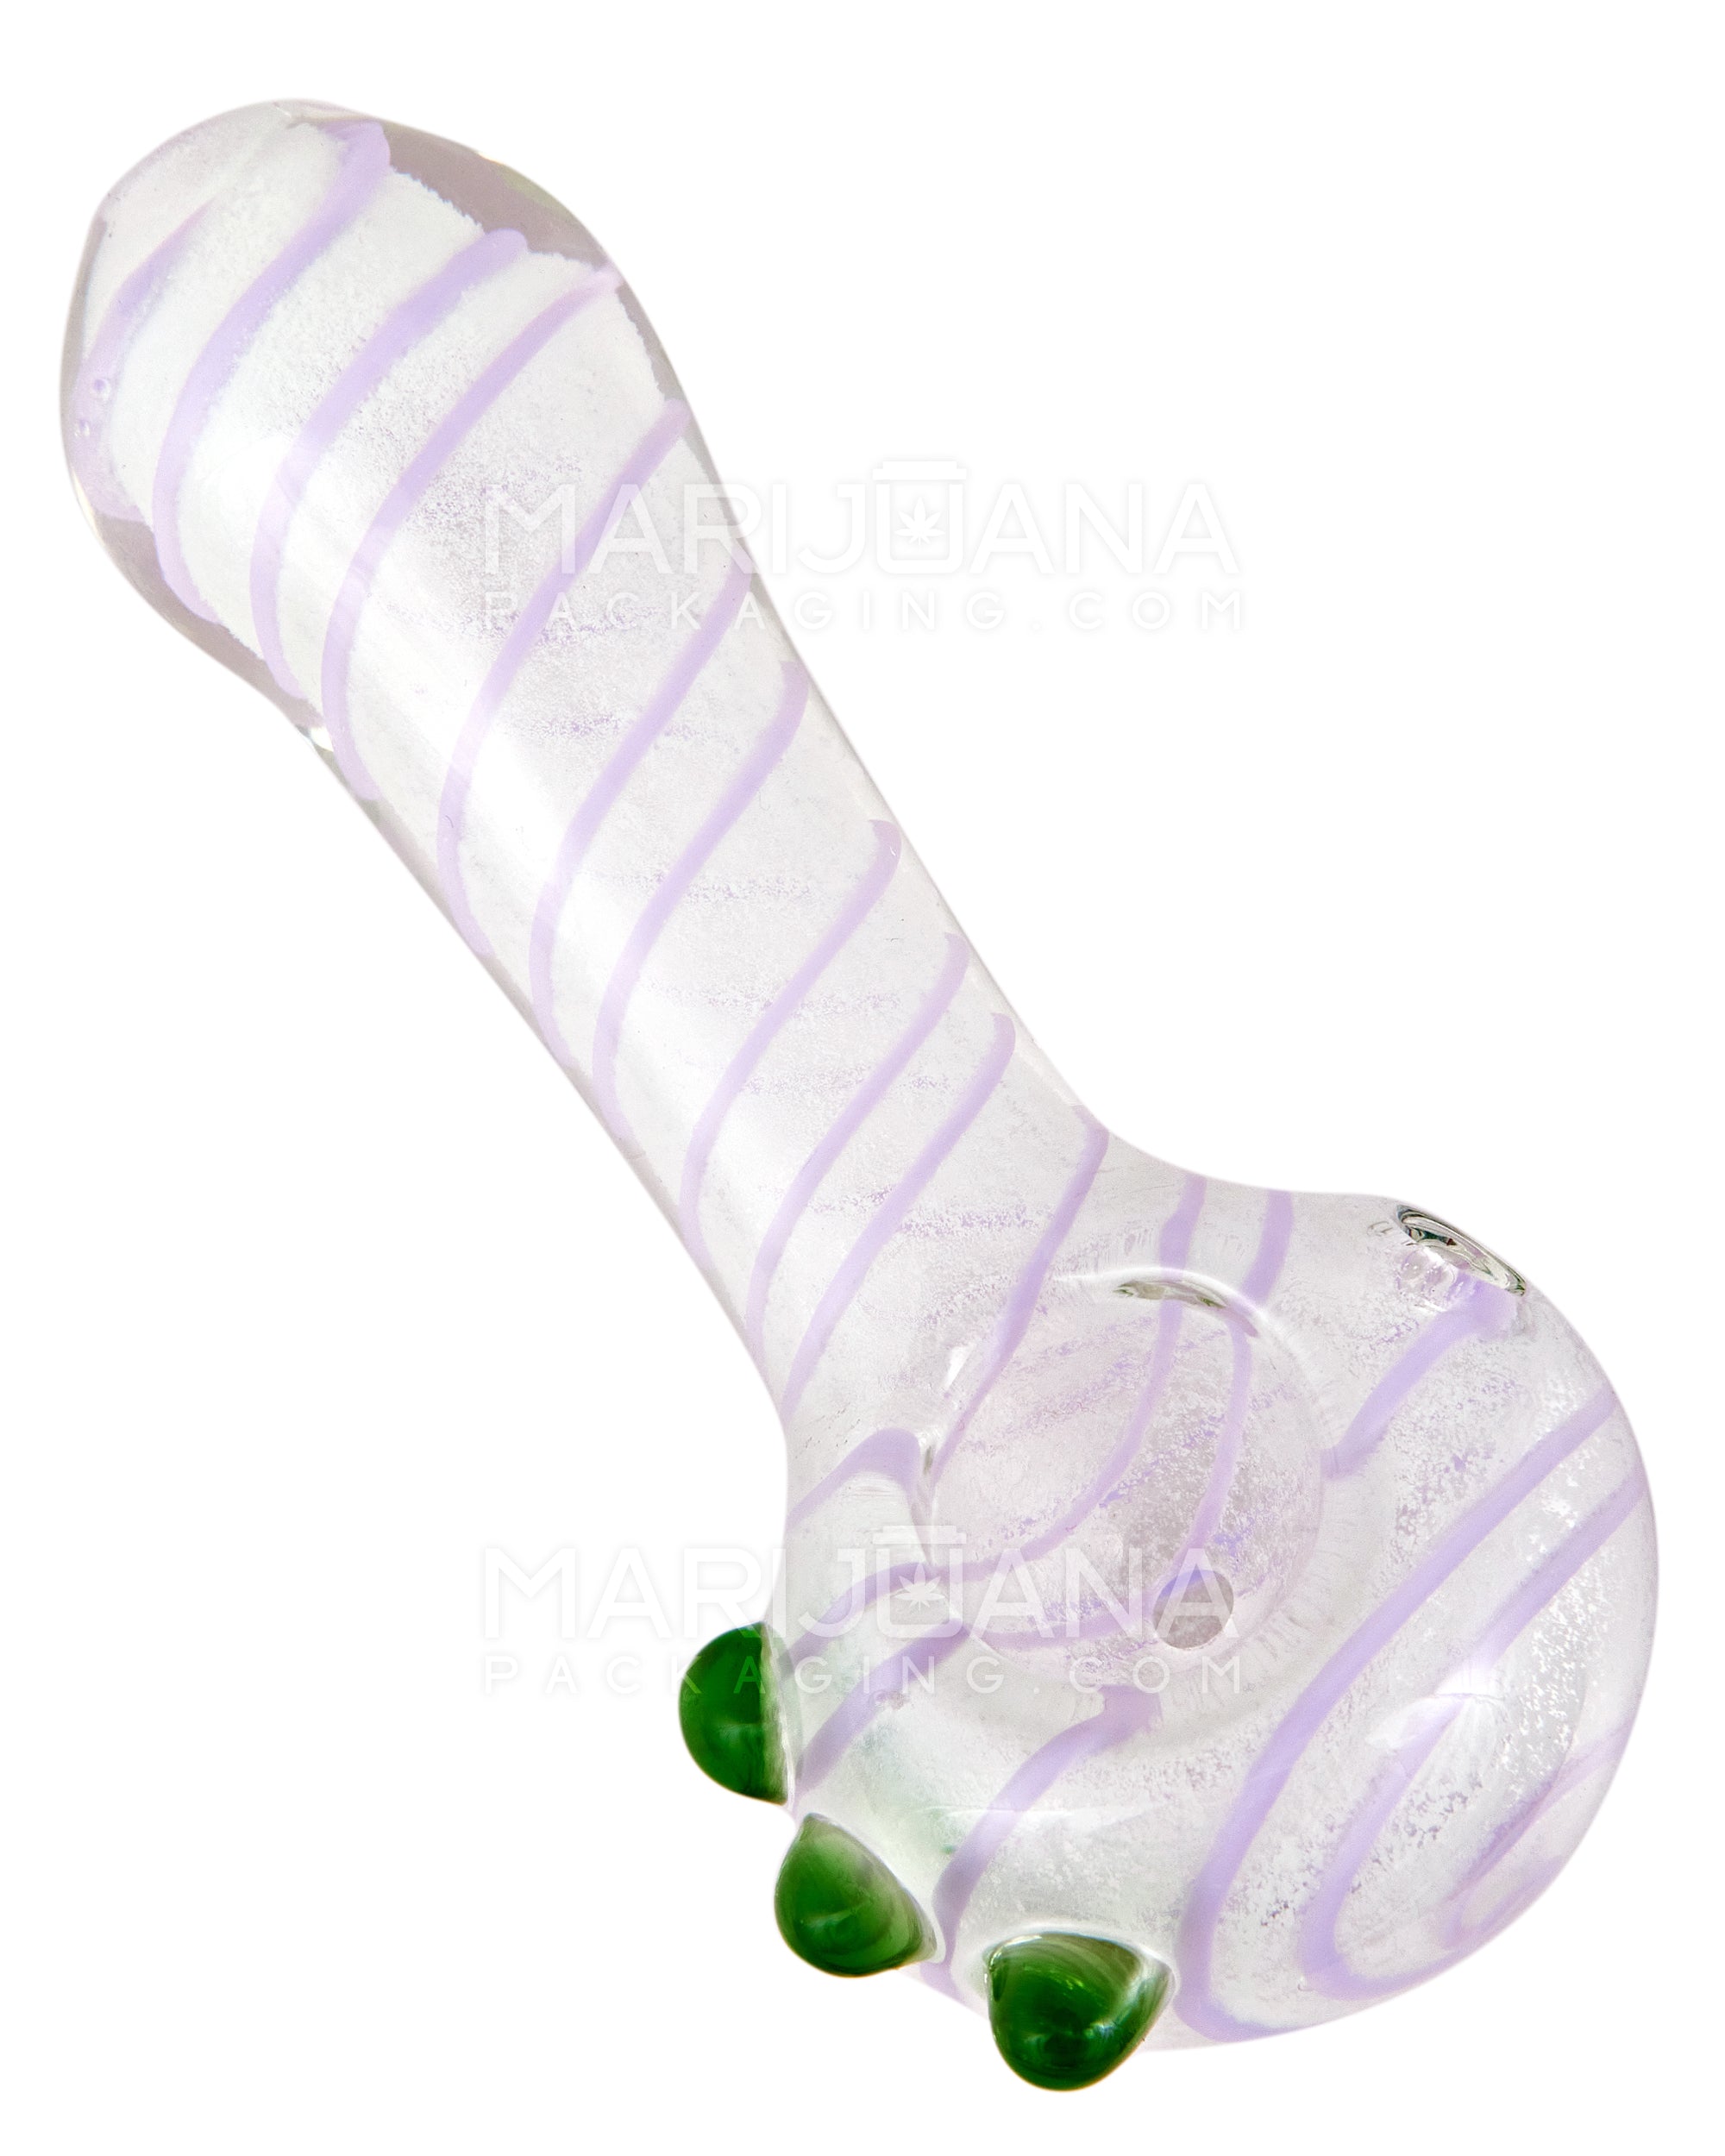 Glow-in-the-Dark | Spiral Spoon Hand Pipe w/ Triple Knockers | 3.5in Long - Glass - Assorted - 7